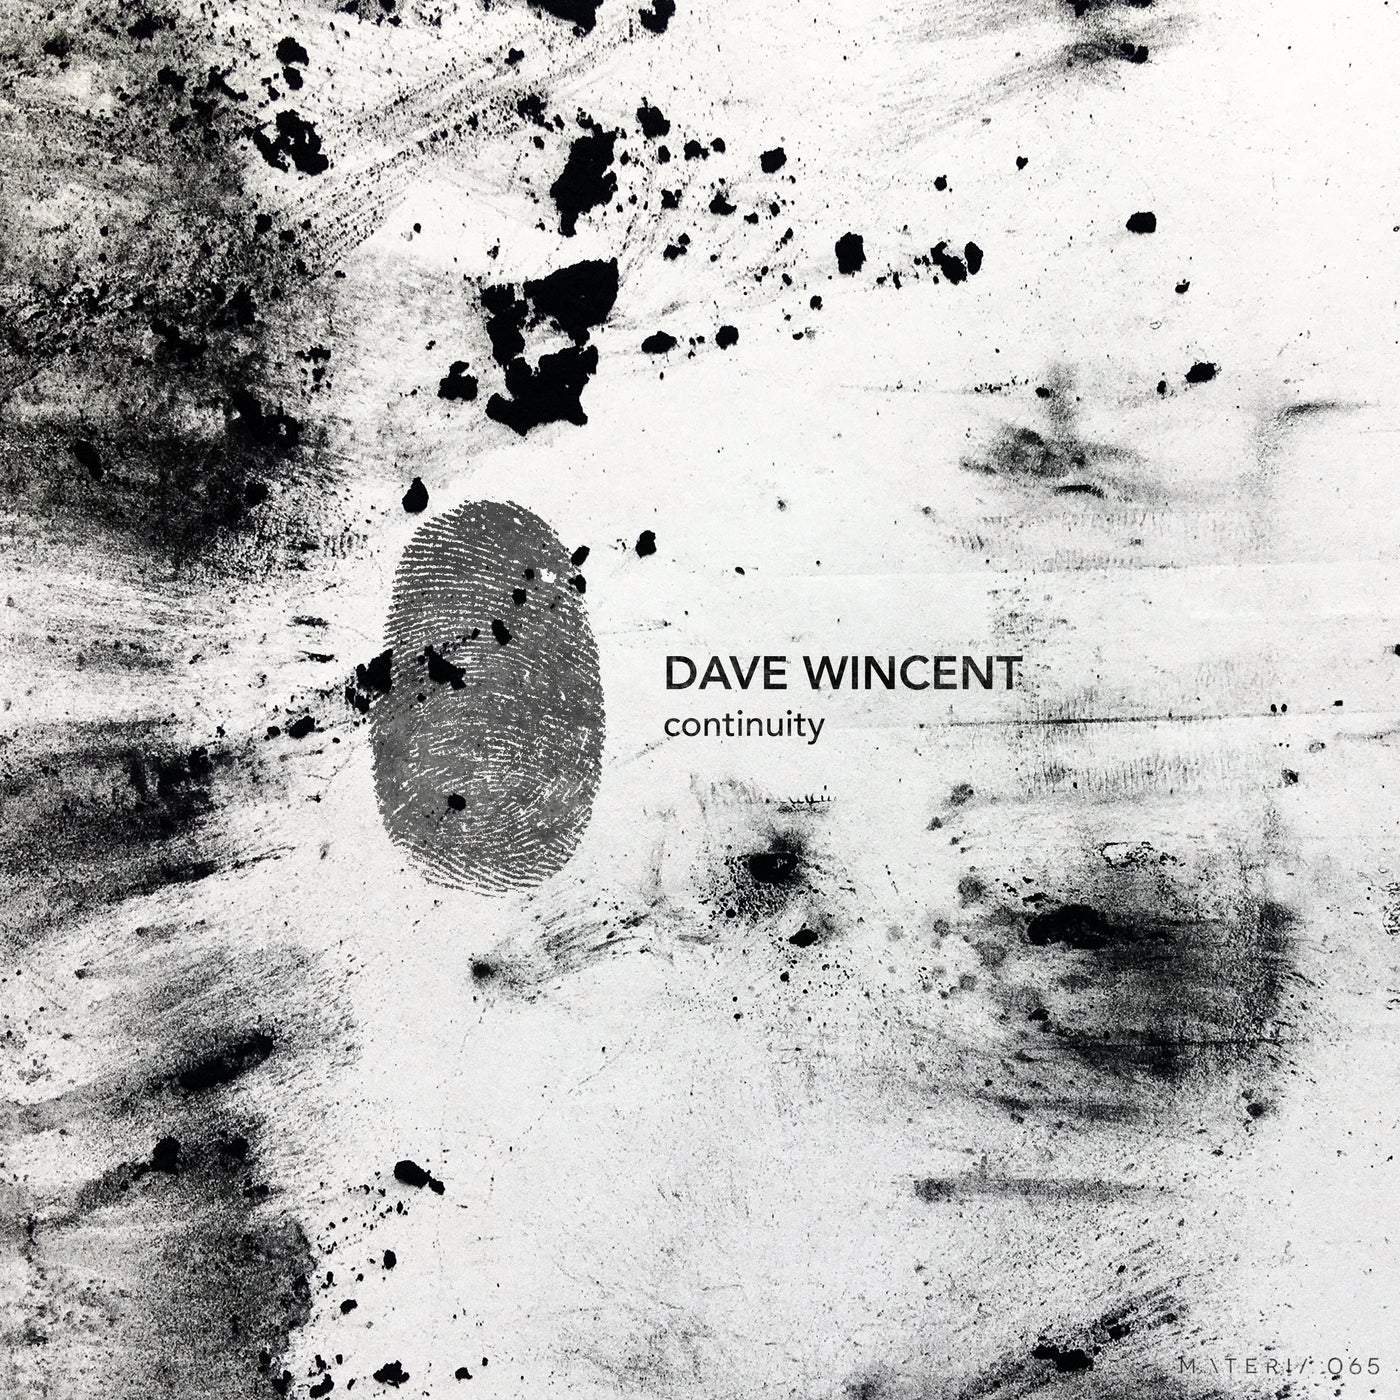 image cover: Dave Wincent - Continuity EP / MATERIA065